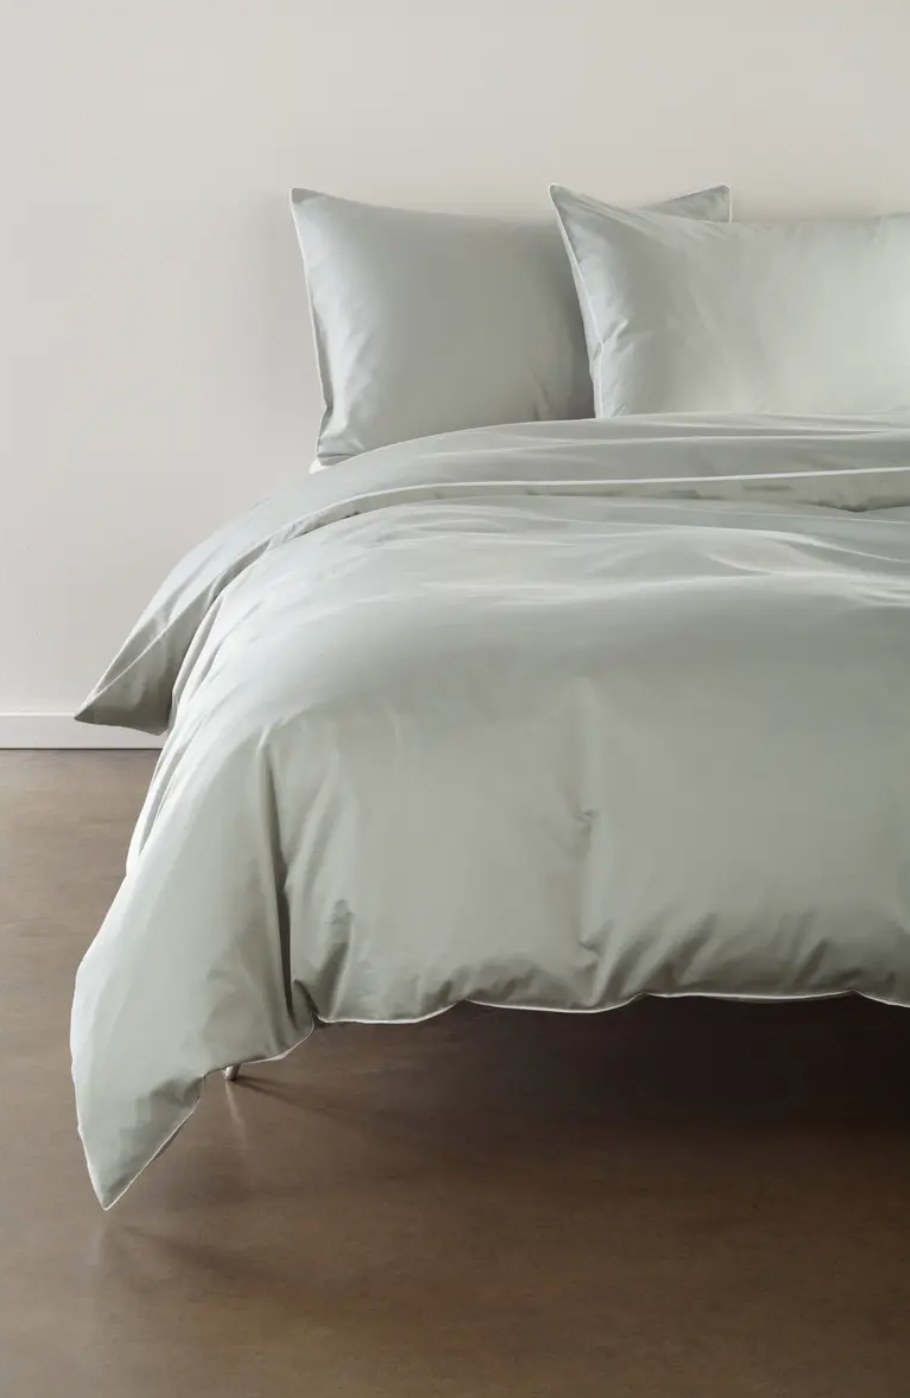 the light gray duvet and sham set on a bed